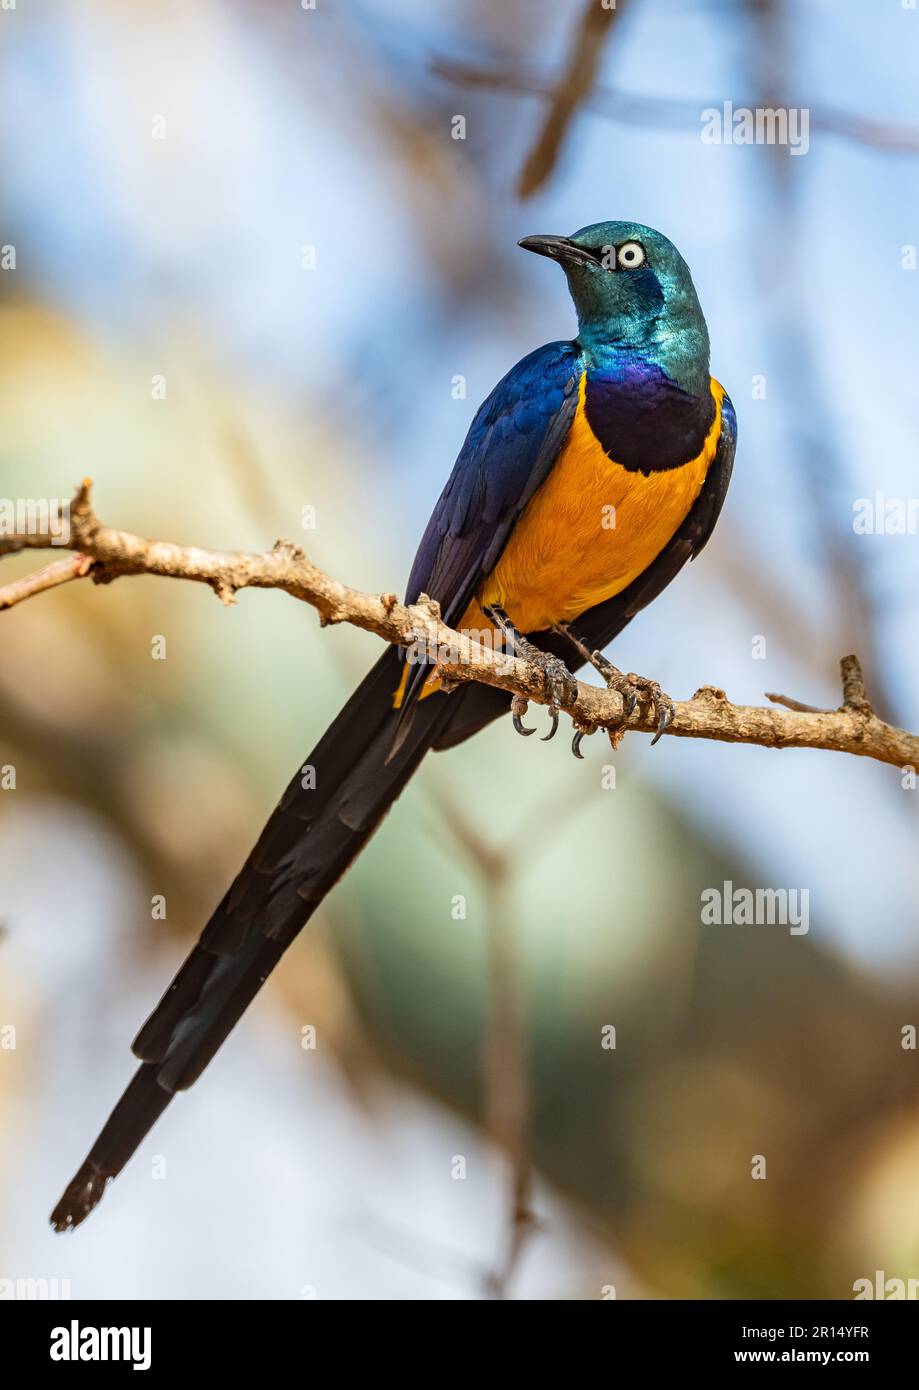 A colorful Golden-breasted Starling (Lamprotornis regius) perched on a branch. Kenya, Africa. Stock Photo